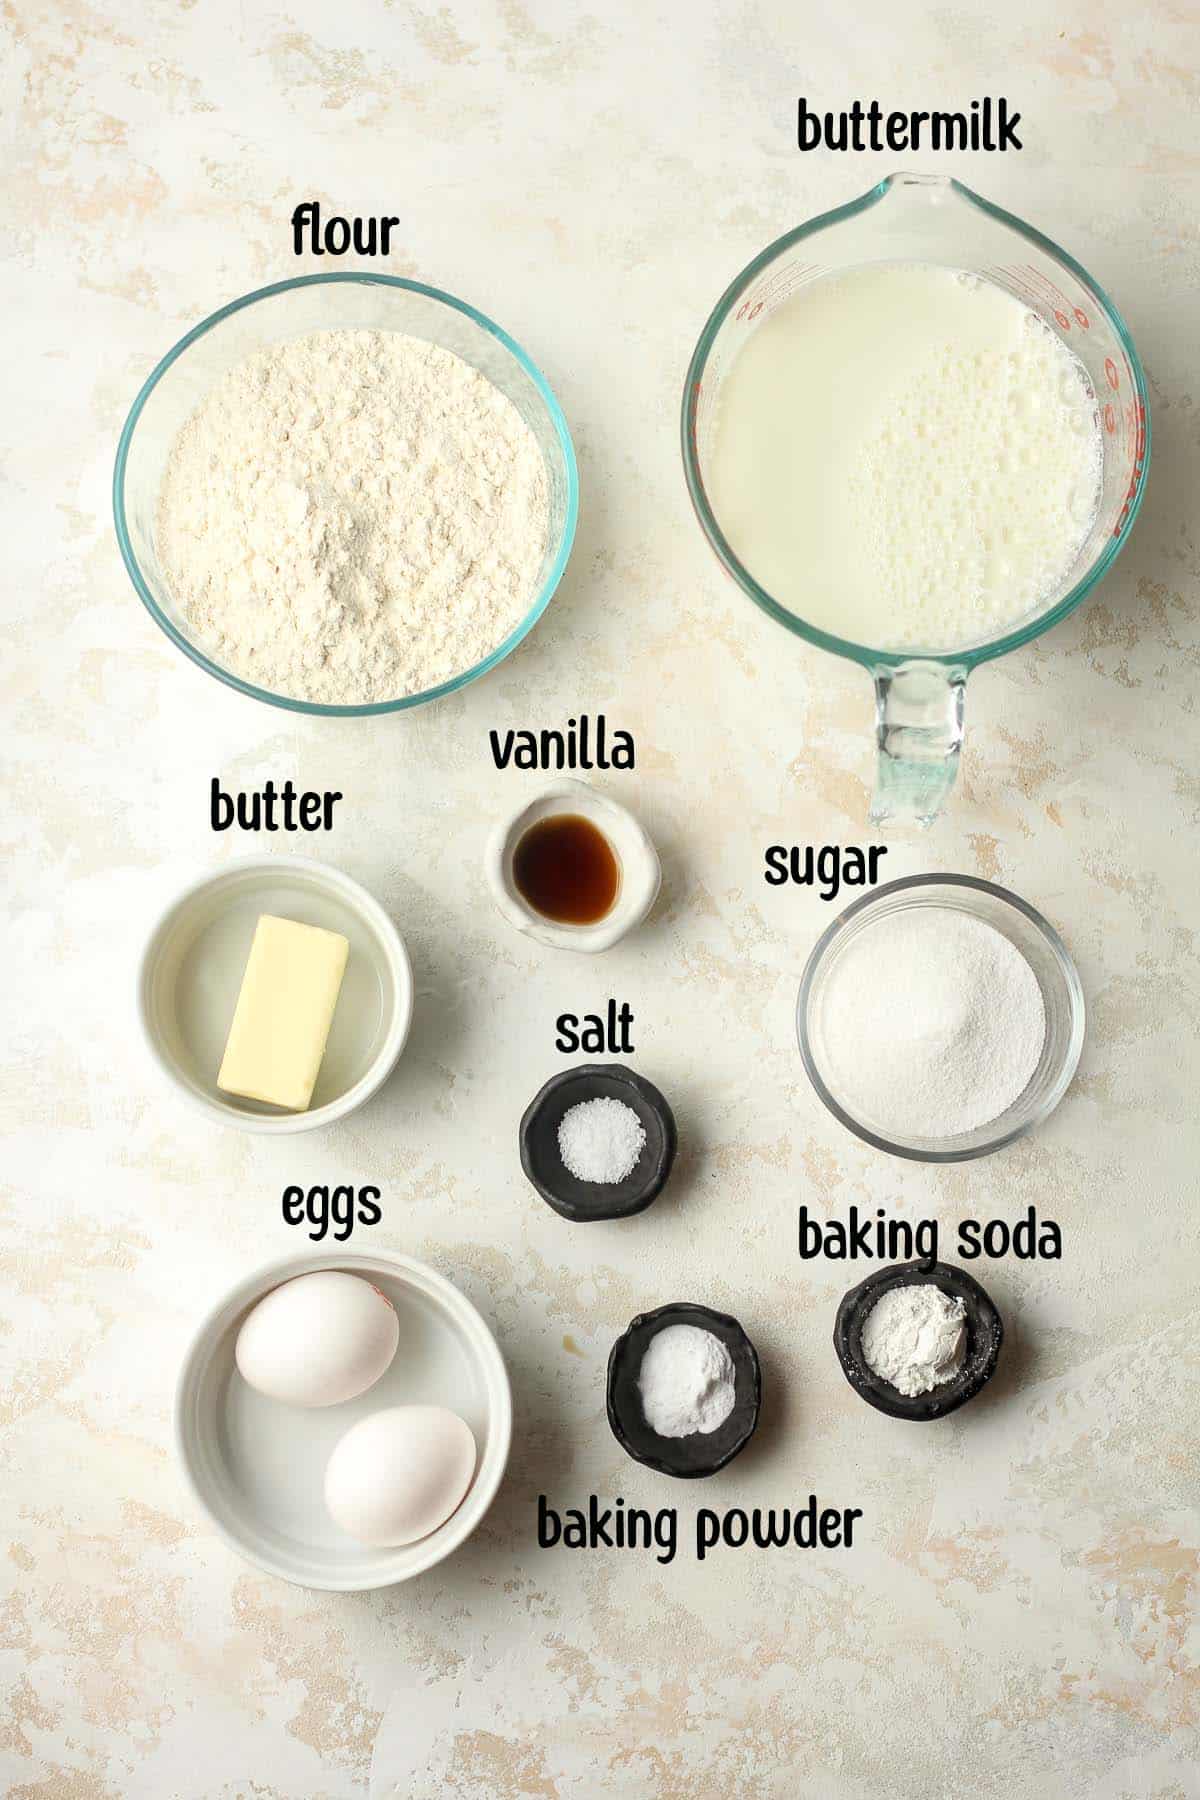 The ingredients for the buttermilk pancakes.